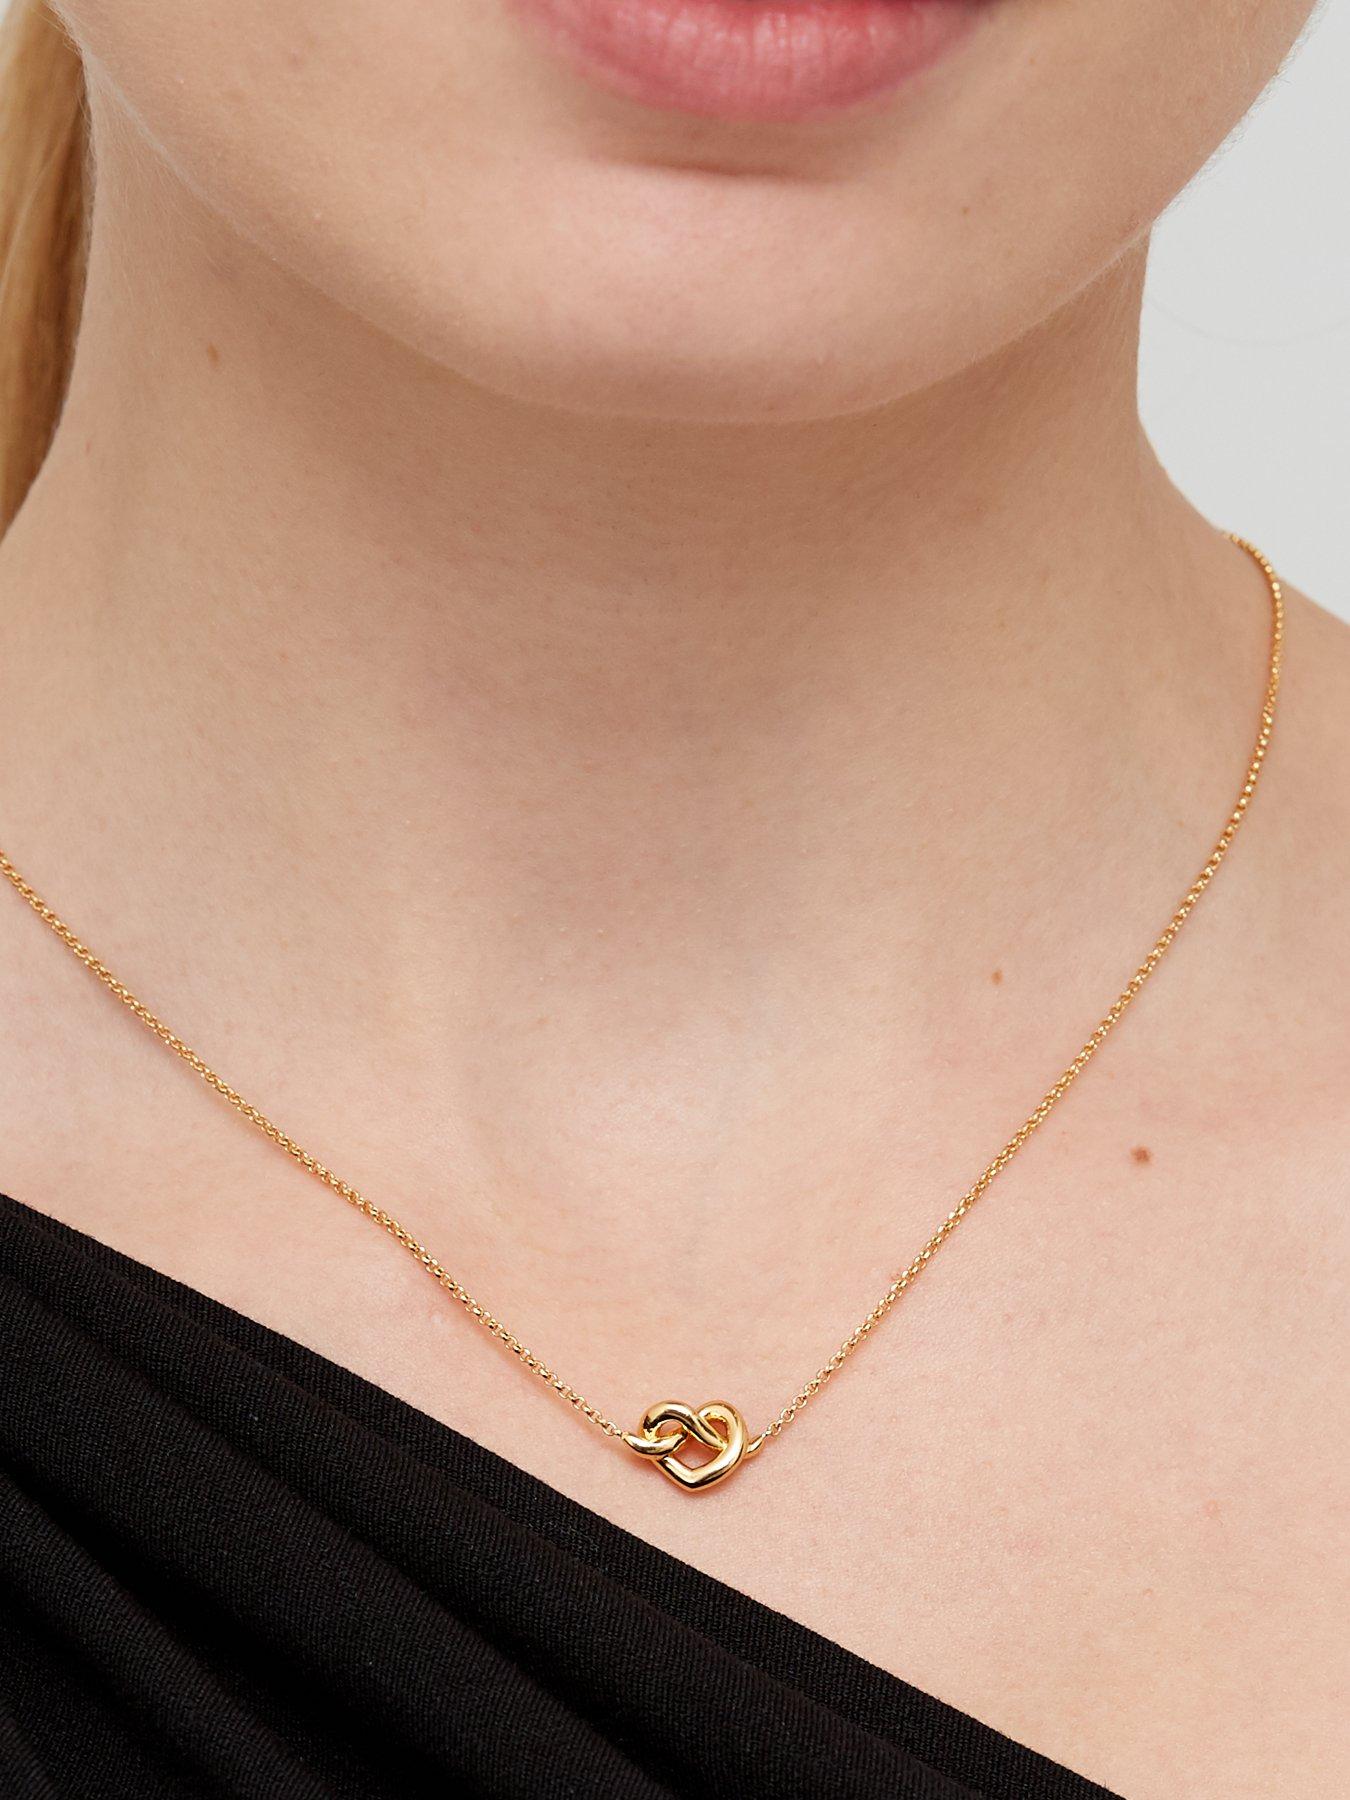 Kate Spade New York Loves Me Knot Necklace - Gold 